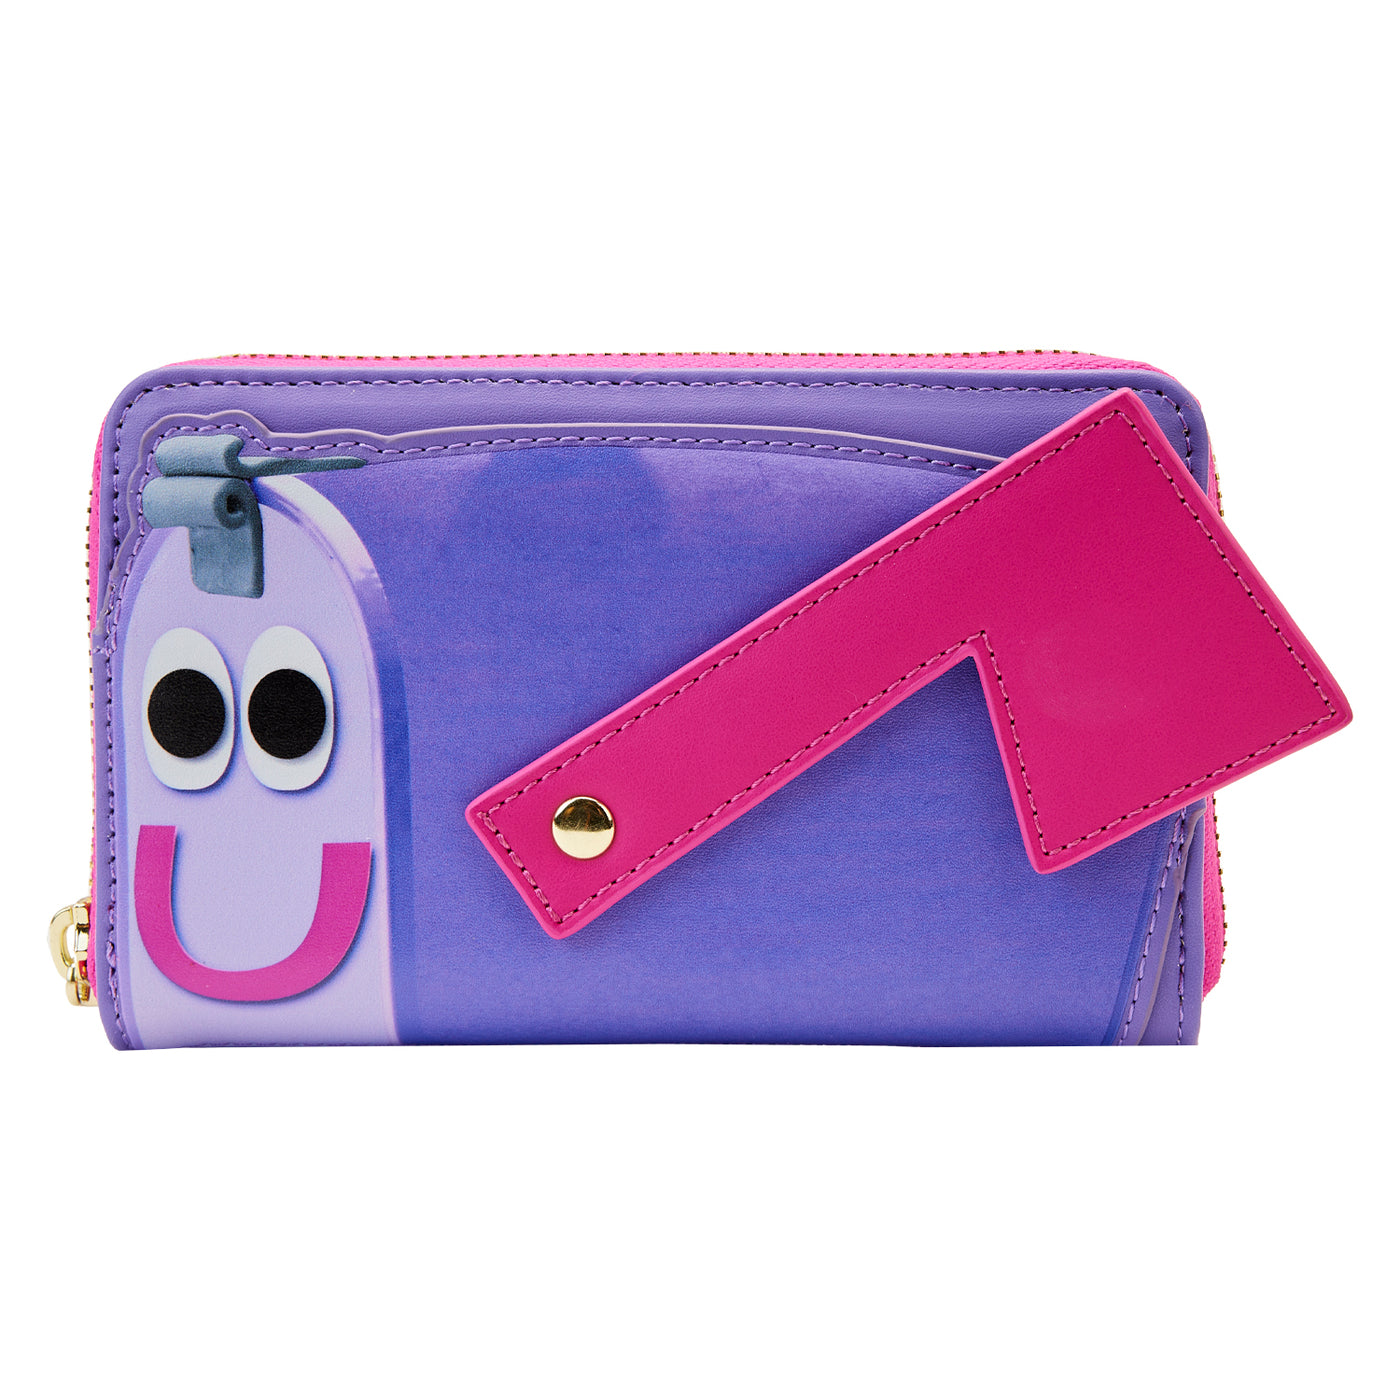 Nickelodeon Blues Clues Mail Time Wallet